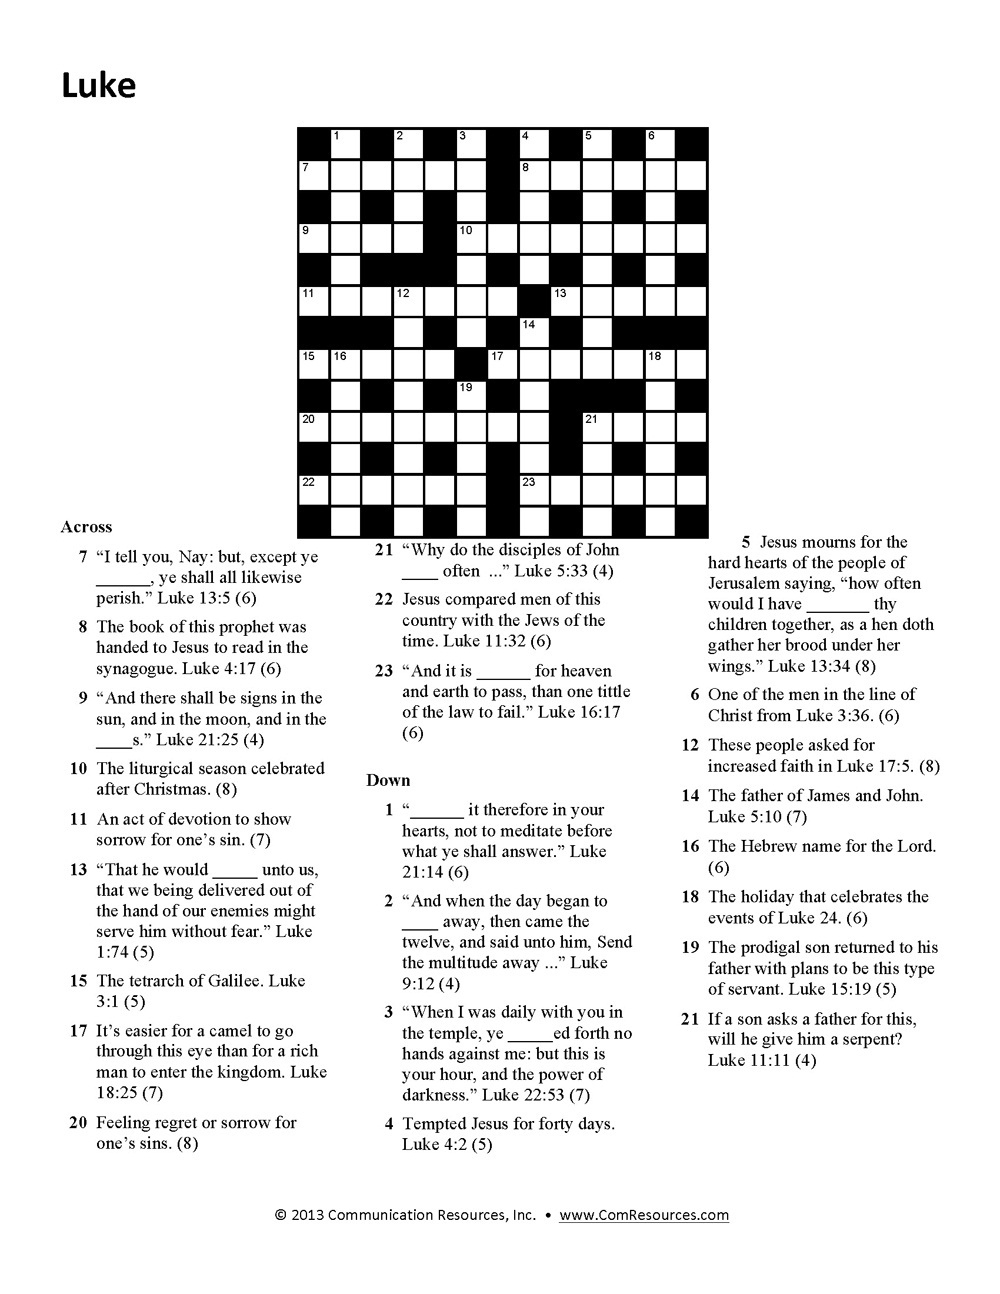 15 Fun Bible Crossword Puzzles | Kittybabylove - Printable Crossword Puzzles About The Bible